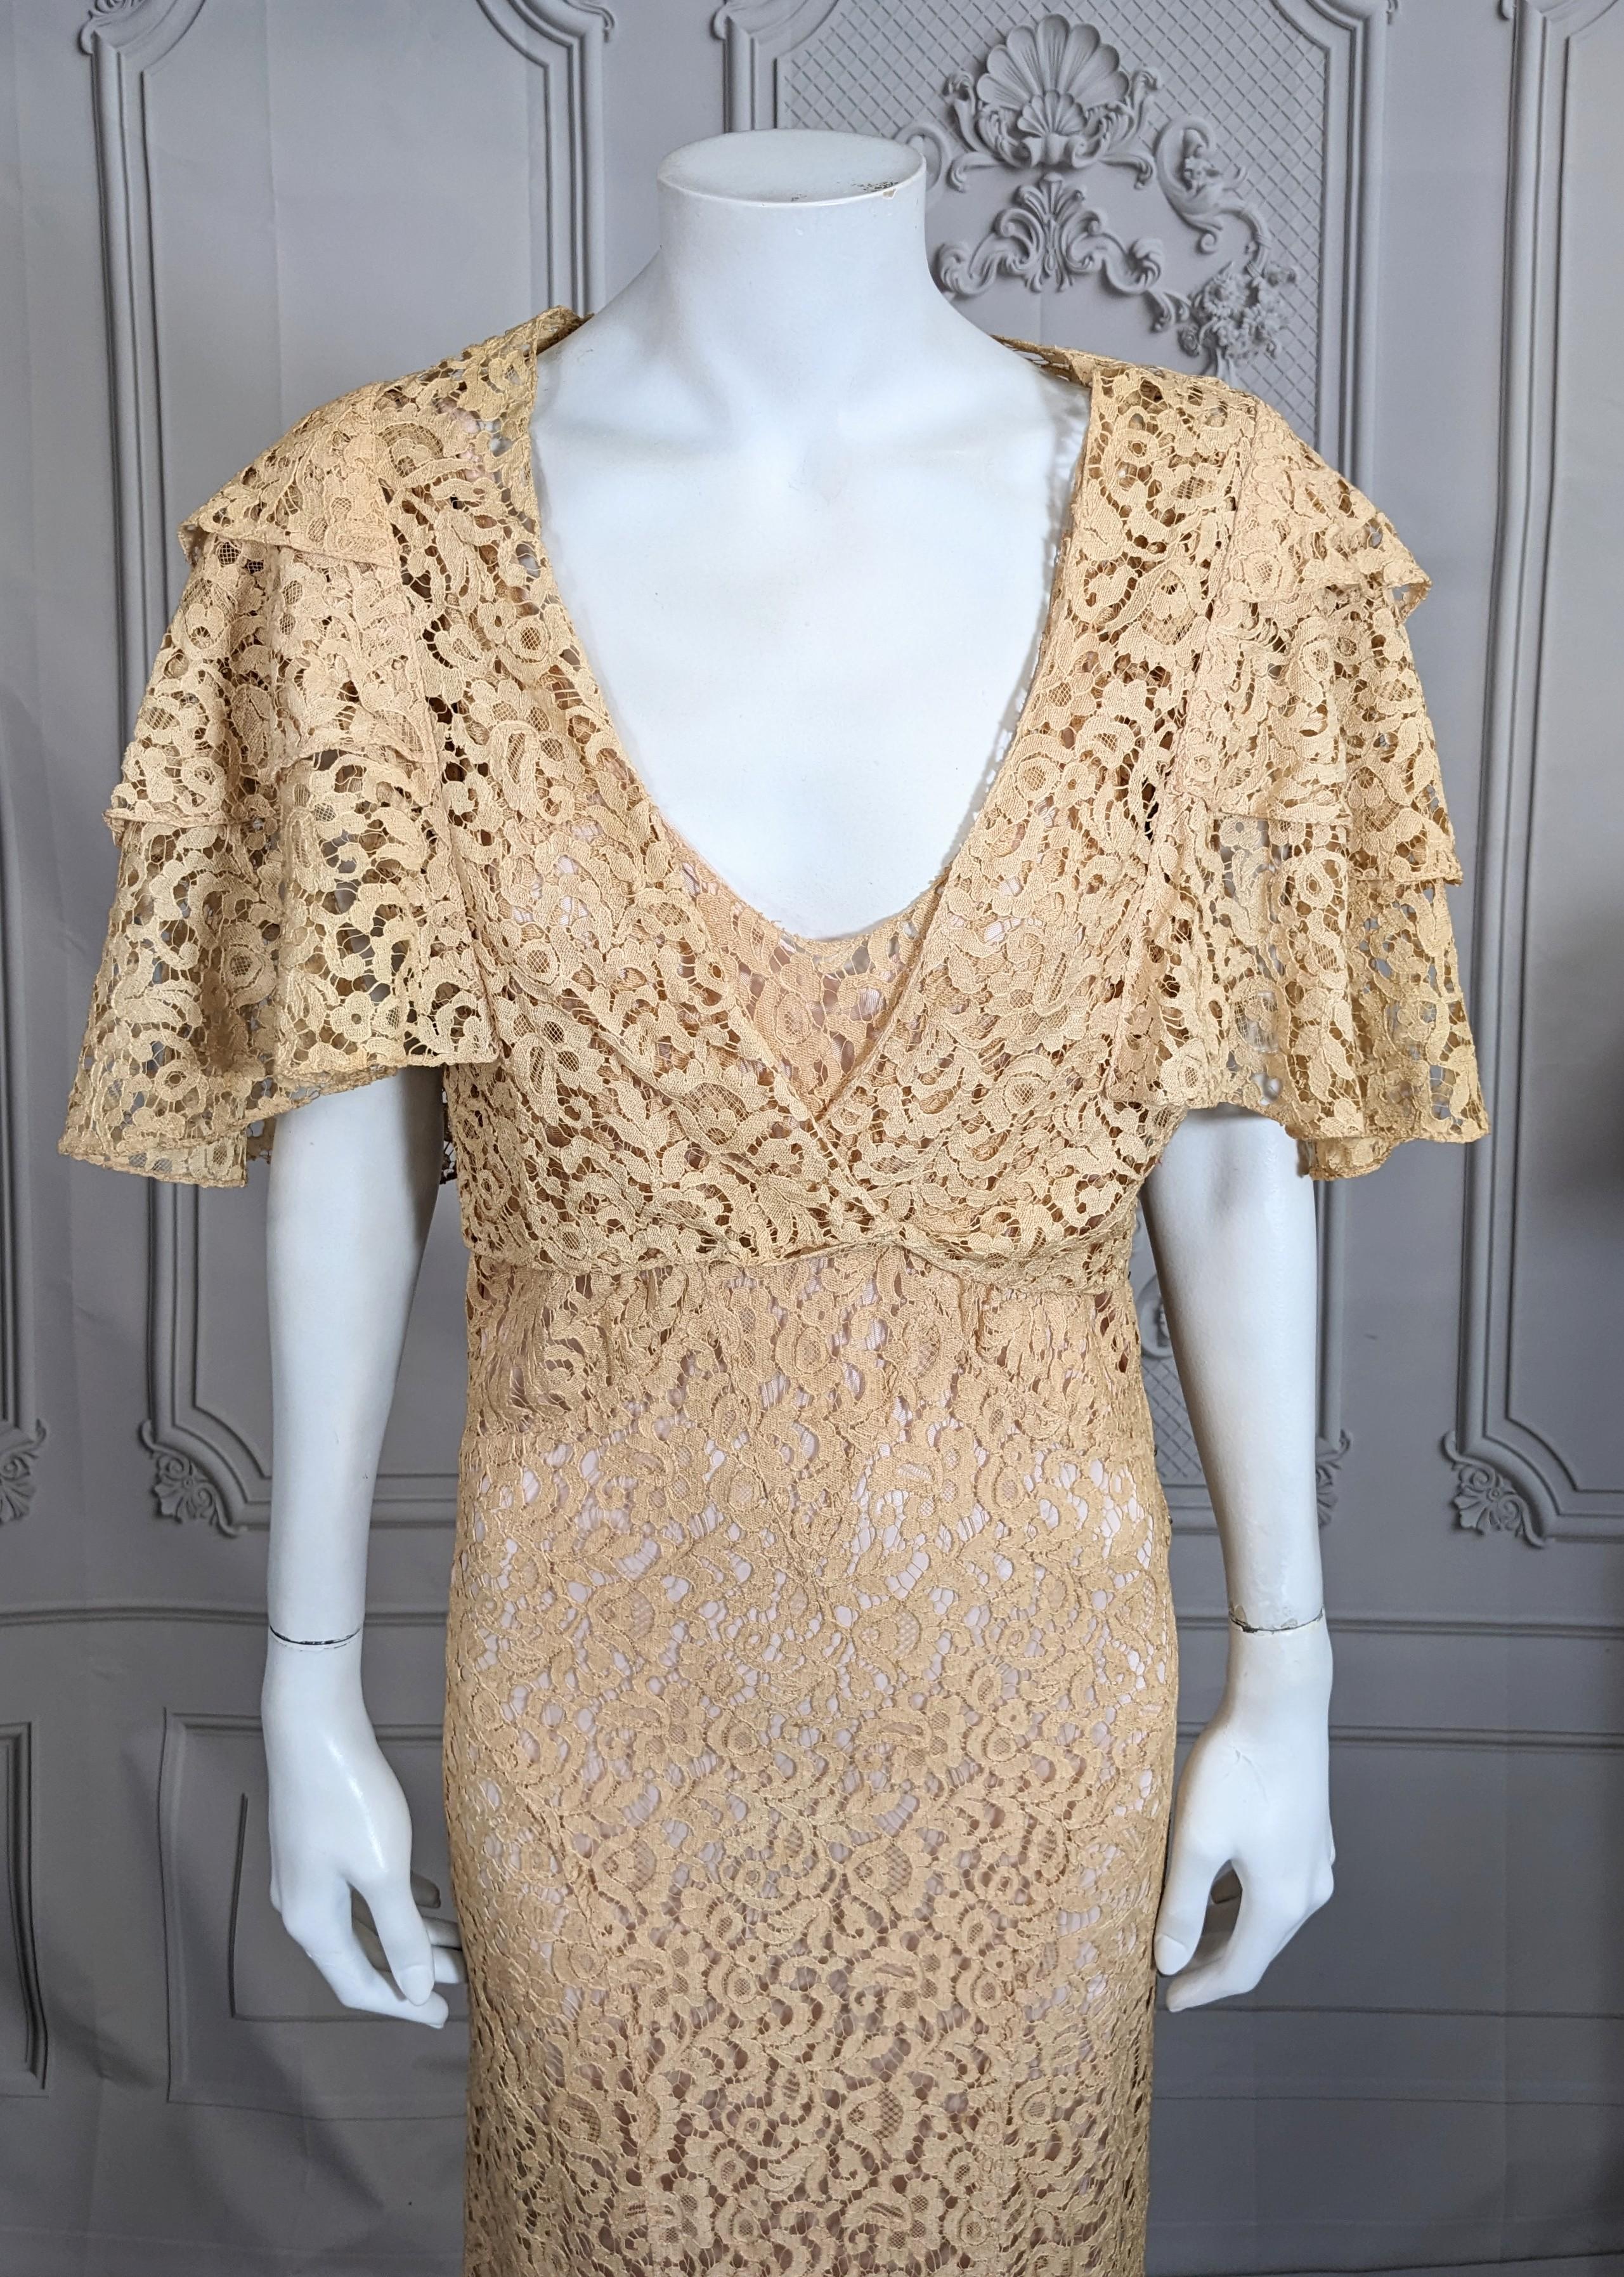 Elegant Art Deco Lace Evening Ensemble  In Good Condition For Sale In New York, NY